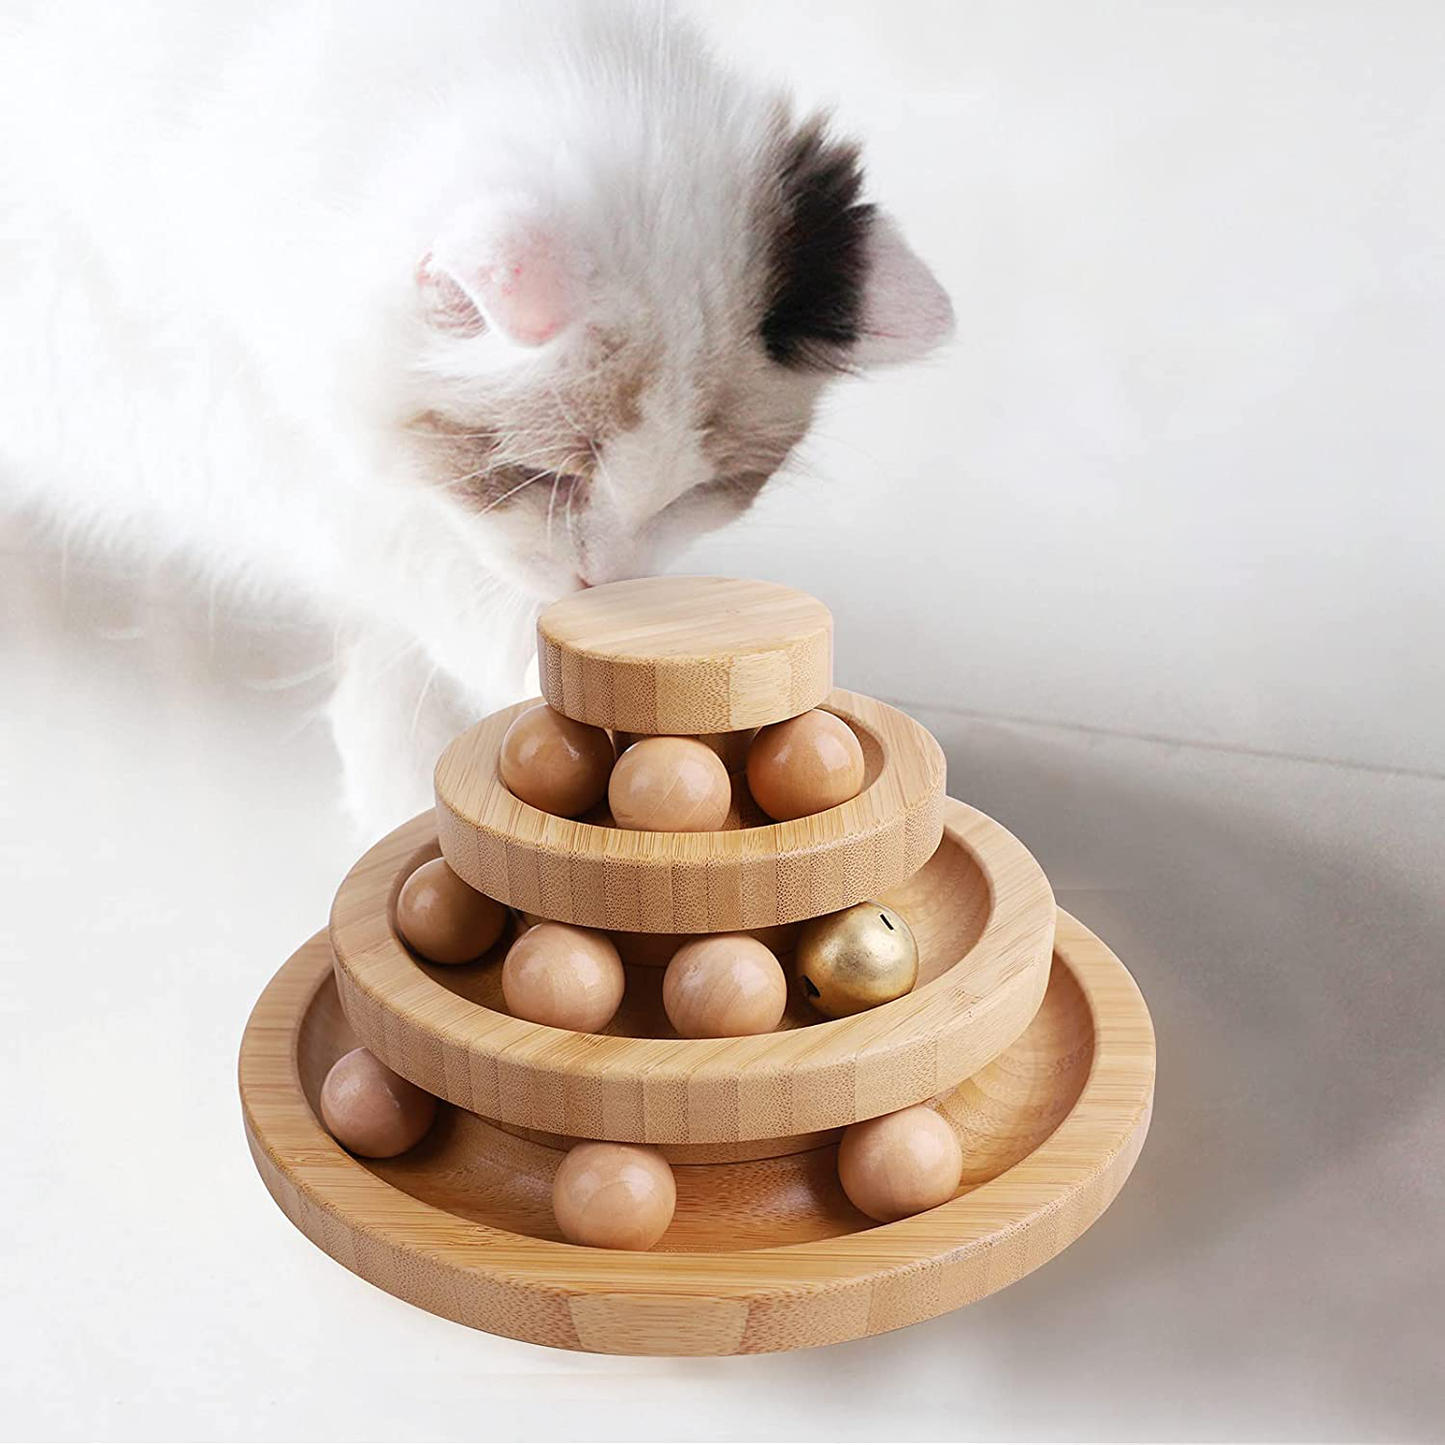 Cat Supplies Funny Roller Cat Balls Bamboo/ Wooden Cat Toys -Three Layer Track Balls Turntable for Kitty Cat Gifts for Your Cats Animals & Pet Supplies > Pet Supplies > Cat Supplies > Cat Toys Smyidel 3 Layer Turntable Bamboo 02  